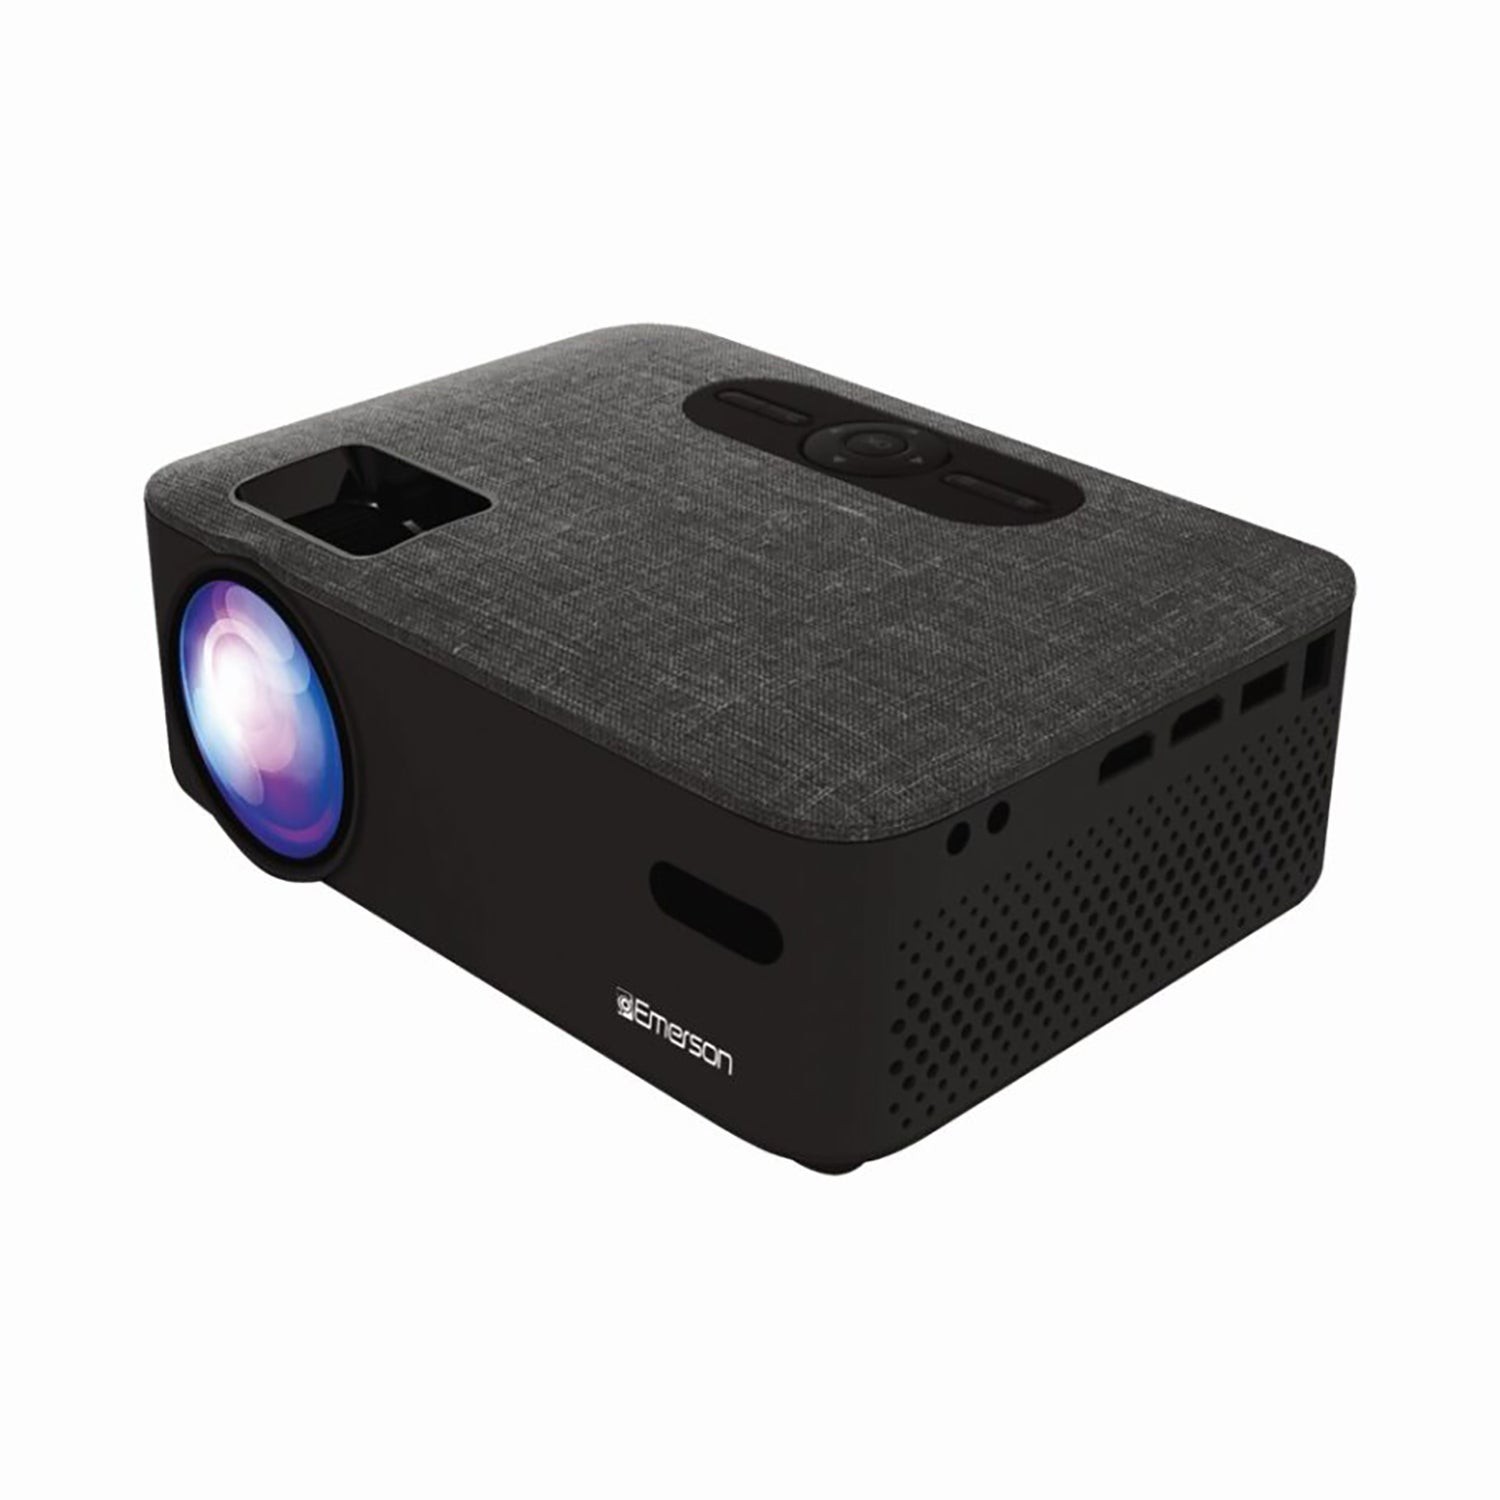 Portable Projector w/ Portable Screen & Carrying Case